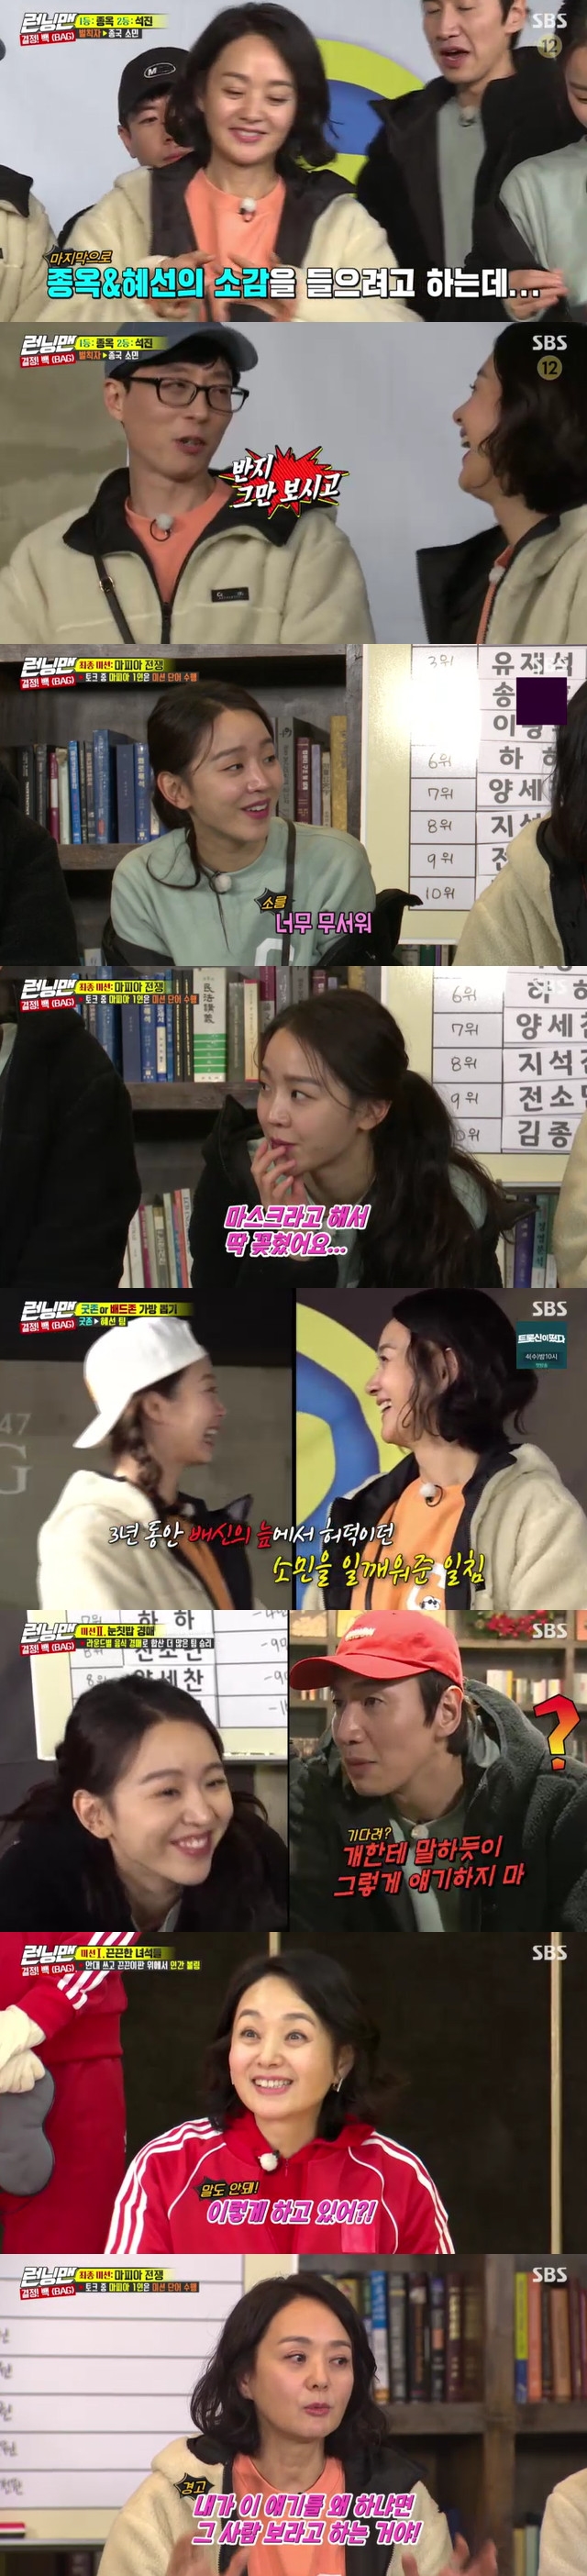 Actor Bae Jong-ok Shin Hye-sun showed off her woman power and completely received Running Man.On March 1, SBS Running Man appeared as a guest by Bae Jong-ok and Shin Hye-sun, and with Running Man members, they came to the Decision! Back race.Before the full-scale mission, the game began. Shin Hye-sun laughed as he shouted 1 before the game started with over-motivation.It was a false start, full of motivation.On the other hand, Bae Jong-ok, who did not know the game rule, stayed like a frozen man as advised by Ji Suk-jin, and was left to the last.The first mission that followed was a human sticky, which was a mission to bowl on a sticky plate wearing an eye patch.At the first sight, Shin Hye-sun took watch mode, saying it was fun: with the muddy fight unfolding with the feast of the body gag, the Bae Jong-ok team won the first round victory.The next mission is a snowball auction. Shin Hye-sun led a careful strategy and showed the downside.Especially, Lee Kwang-soo is instructed to wait, wait as if feeding a dog to a dog, and makes Lee Kwang-soo hot.Shin Hye-suns 0-won strategy was hit with a chewy psychological battle, and the properly caught Bae Jong-ok team eventually lost the brain fight.Bae Jong-oks cold and scary Sister Down reversal charm also shined.Bae Jong-ok made a strong sound during the auction of snowballs, saying, I am going to fly my ears.In the end, Jeon So-min, who did not hesitate to do so, had to give out all the money he had in fear.In addition, Bae Jong-ok laughed with his strong bad words and unique coldness.I think it looks bad because the scene is blowing and it looks bad, he said to Haha, who was eating Chinese food after the mission victory.What? asked Yoo Jae-Suks question, What? And embarrassed the members.Yoo Jae-Suk said, It is not a joke, and My sister suddenly moved away in a moment.Bae Jong-ok gave viewers a fresh smile with his unique distance until the end.Bae Jong-ok, who won the ring for the first place, was distracted by the ring and failed to answer the question of Yoo Jae-Suk, Tell me your last impression, making Yoo Jae-Suk burst into bread.bak-beauty